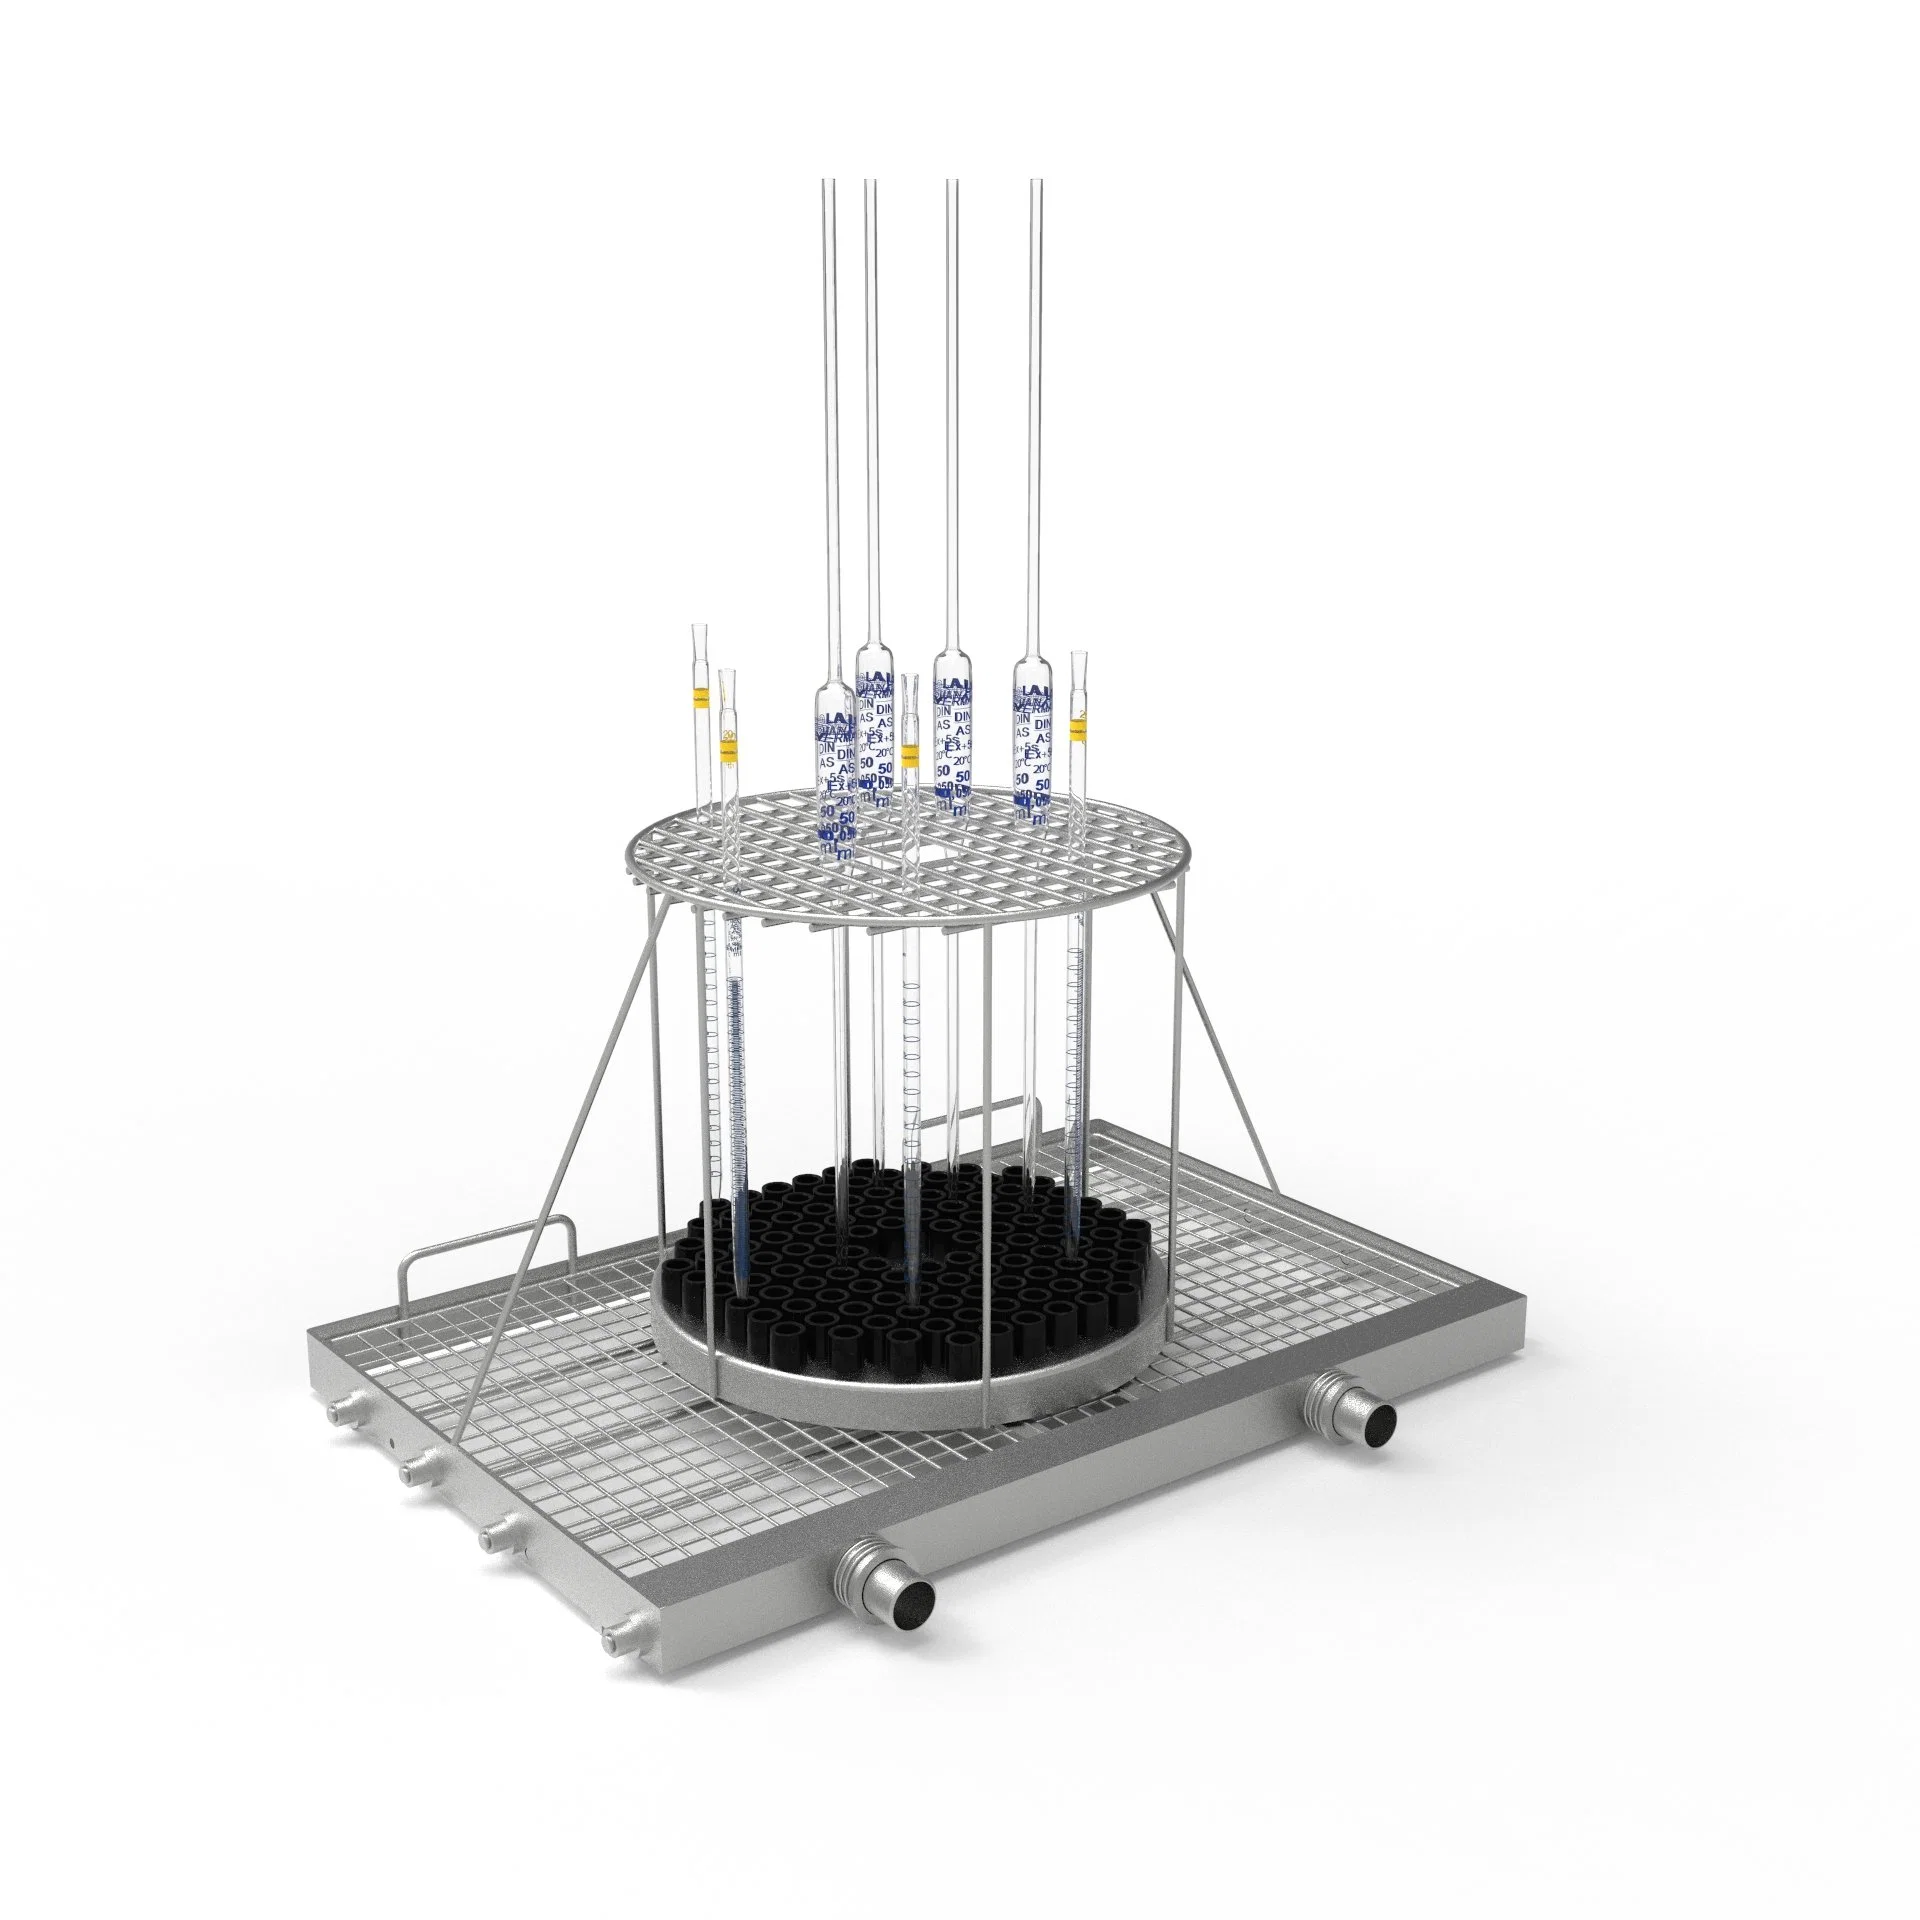 Laboratory Cleaning Basket Suitable for Pipette Cleaning Single Cleaning Position 116-Bit Stainless Steel Made of Anti-Rust and Anti-Corrosion